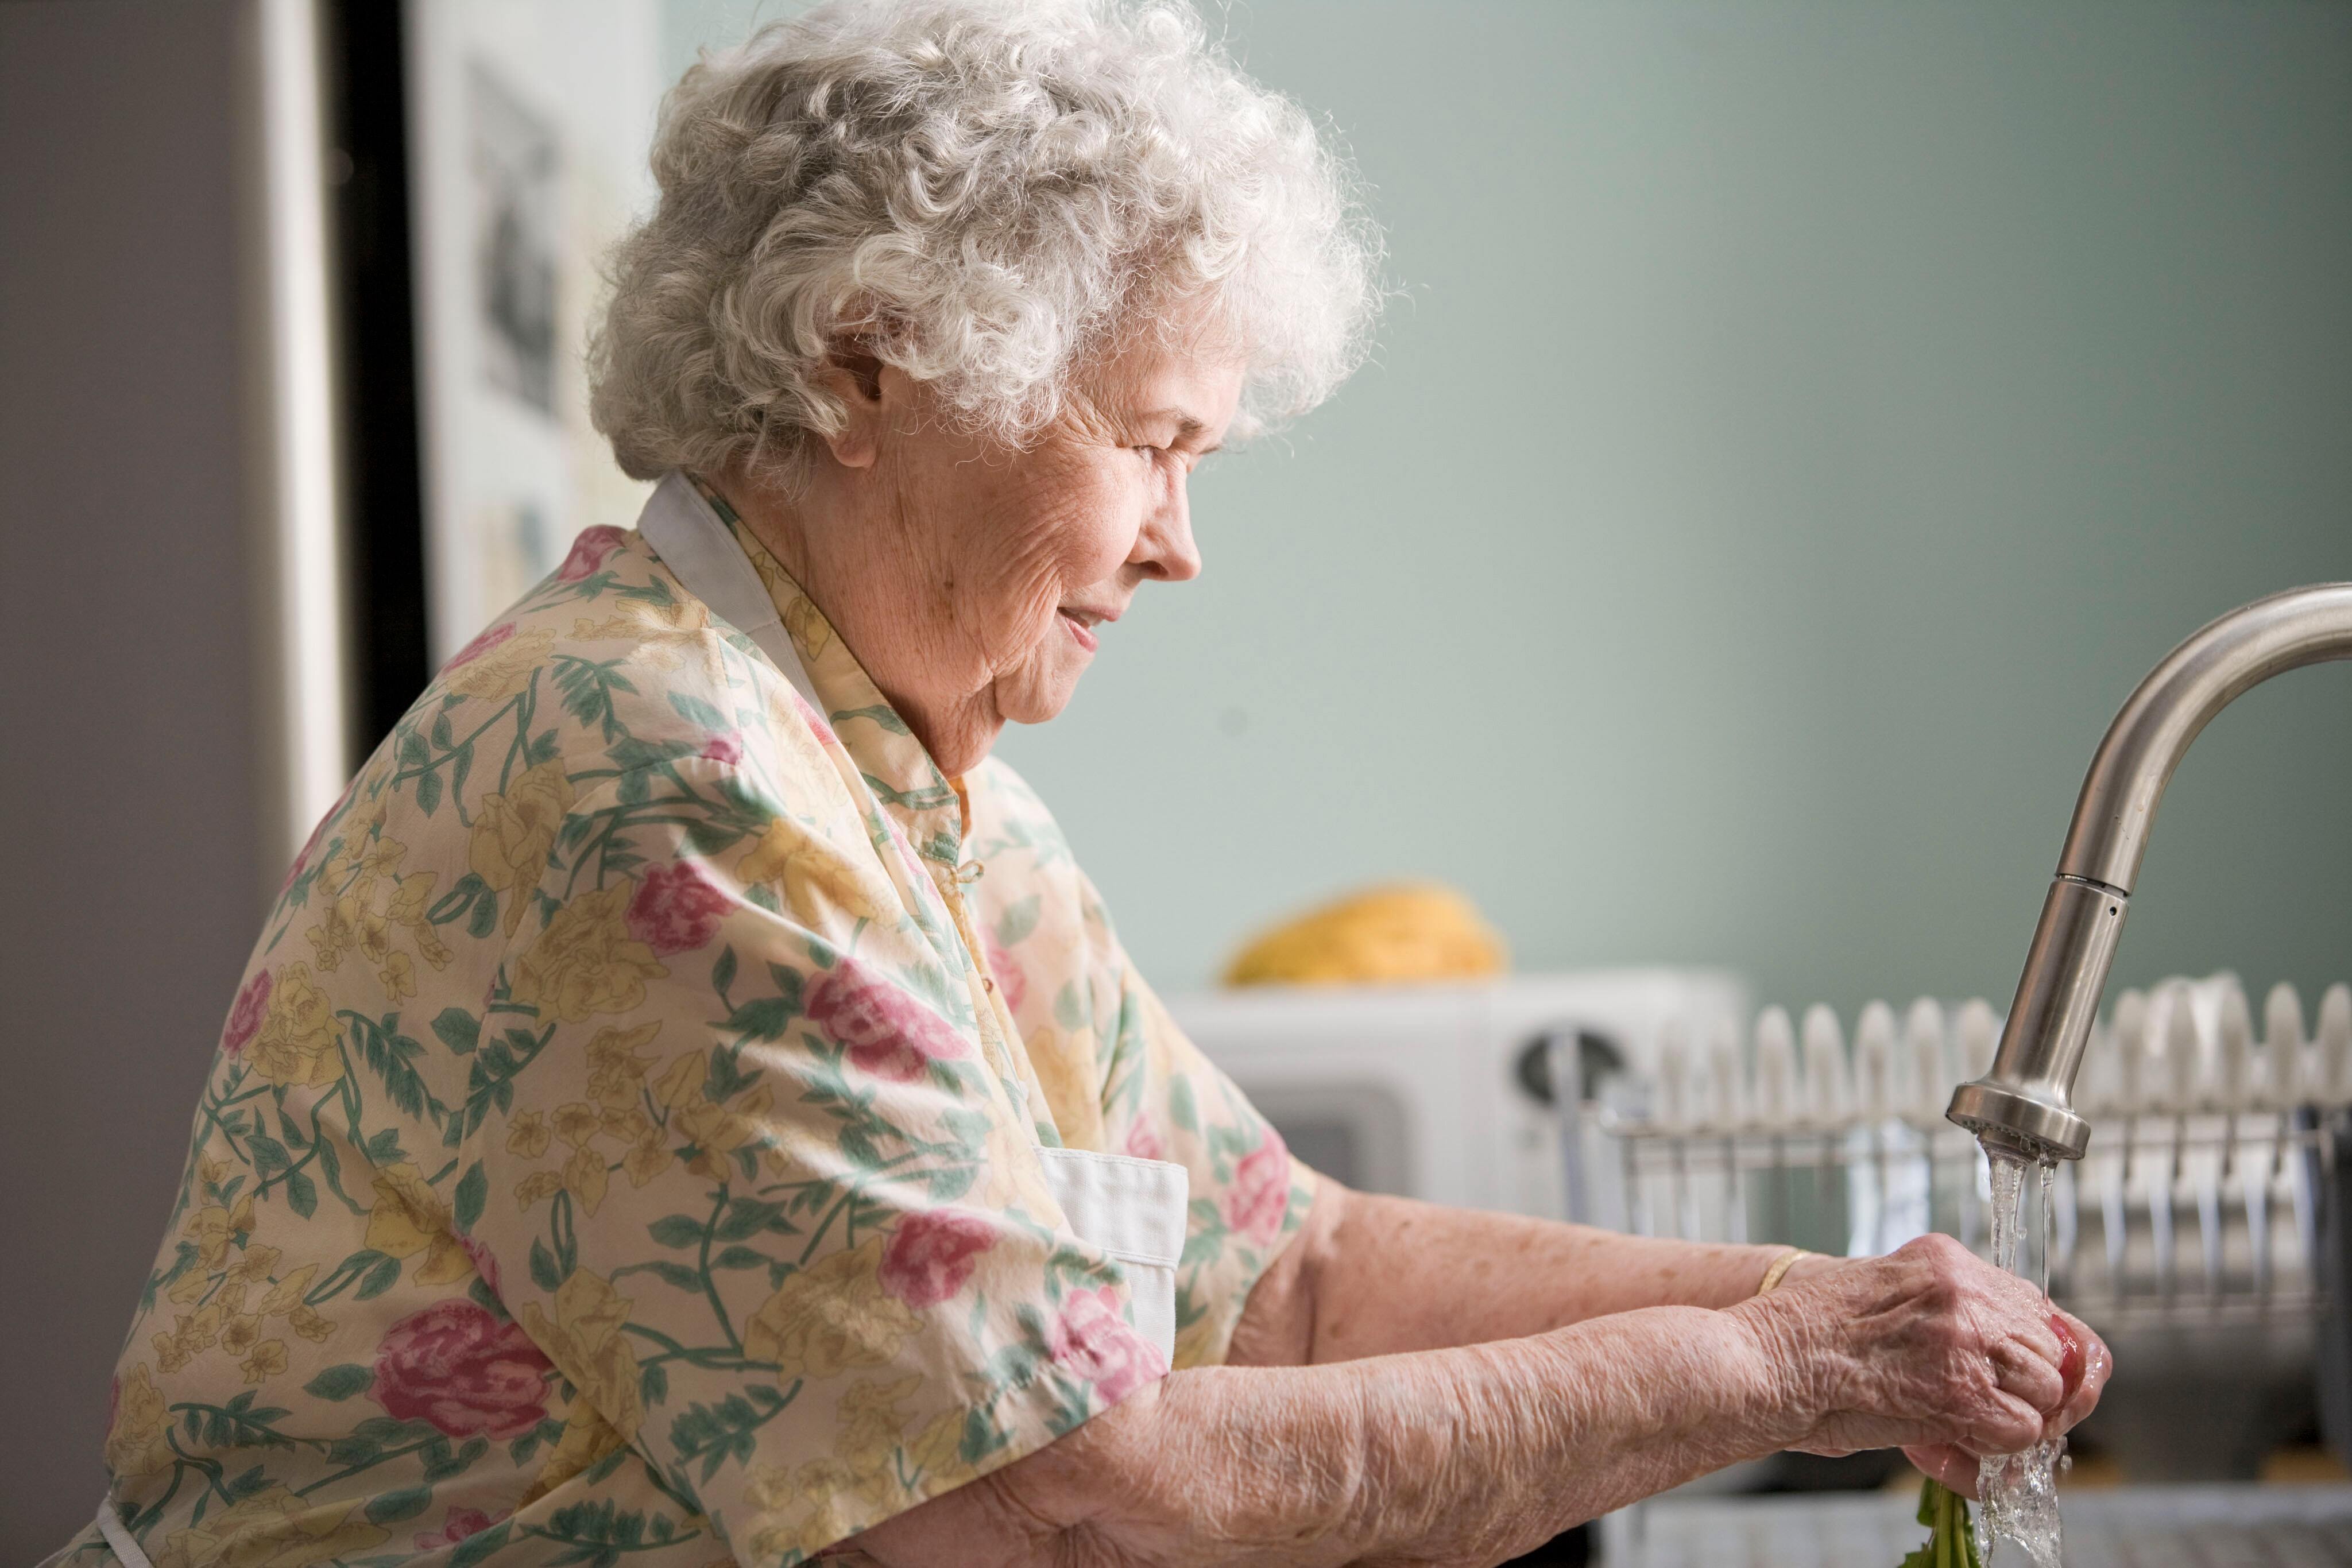 A complete guide to home security for the elderly